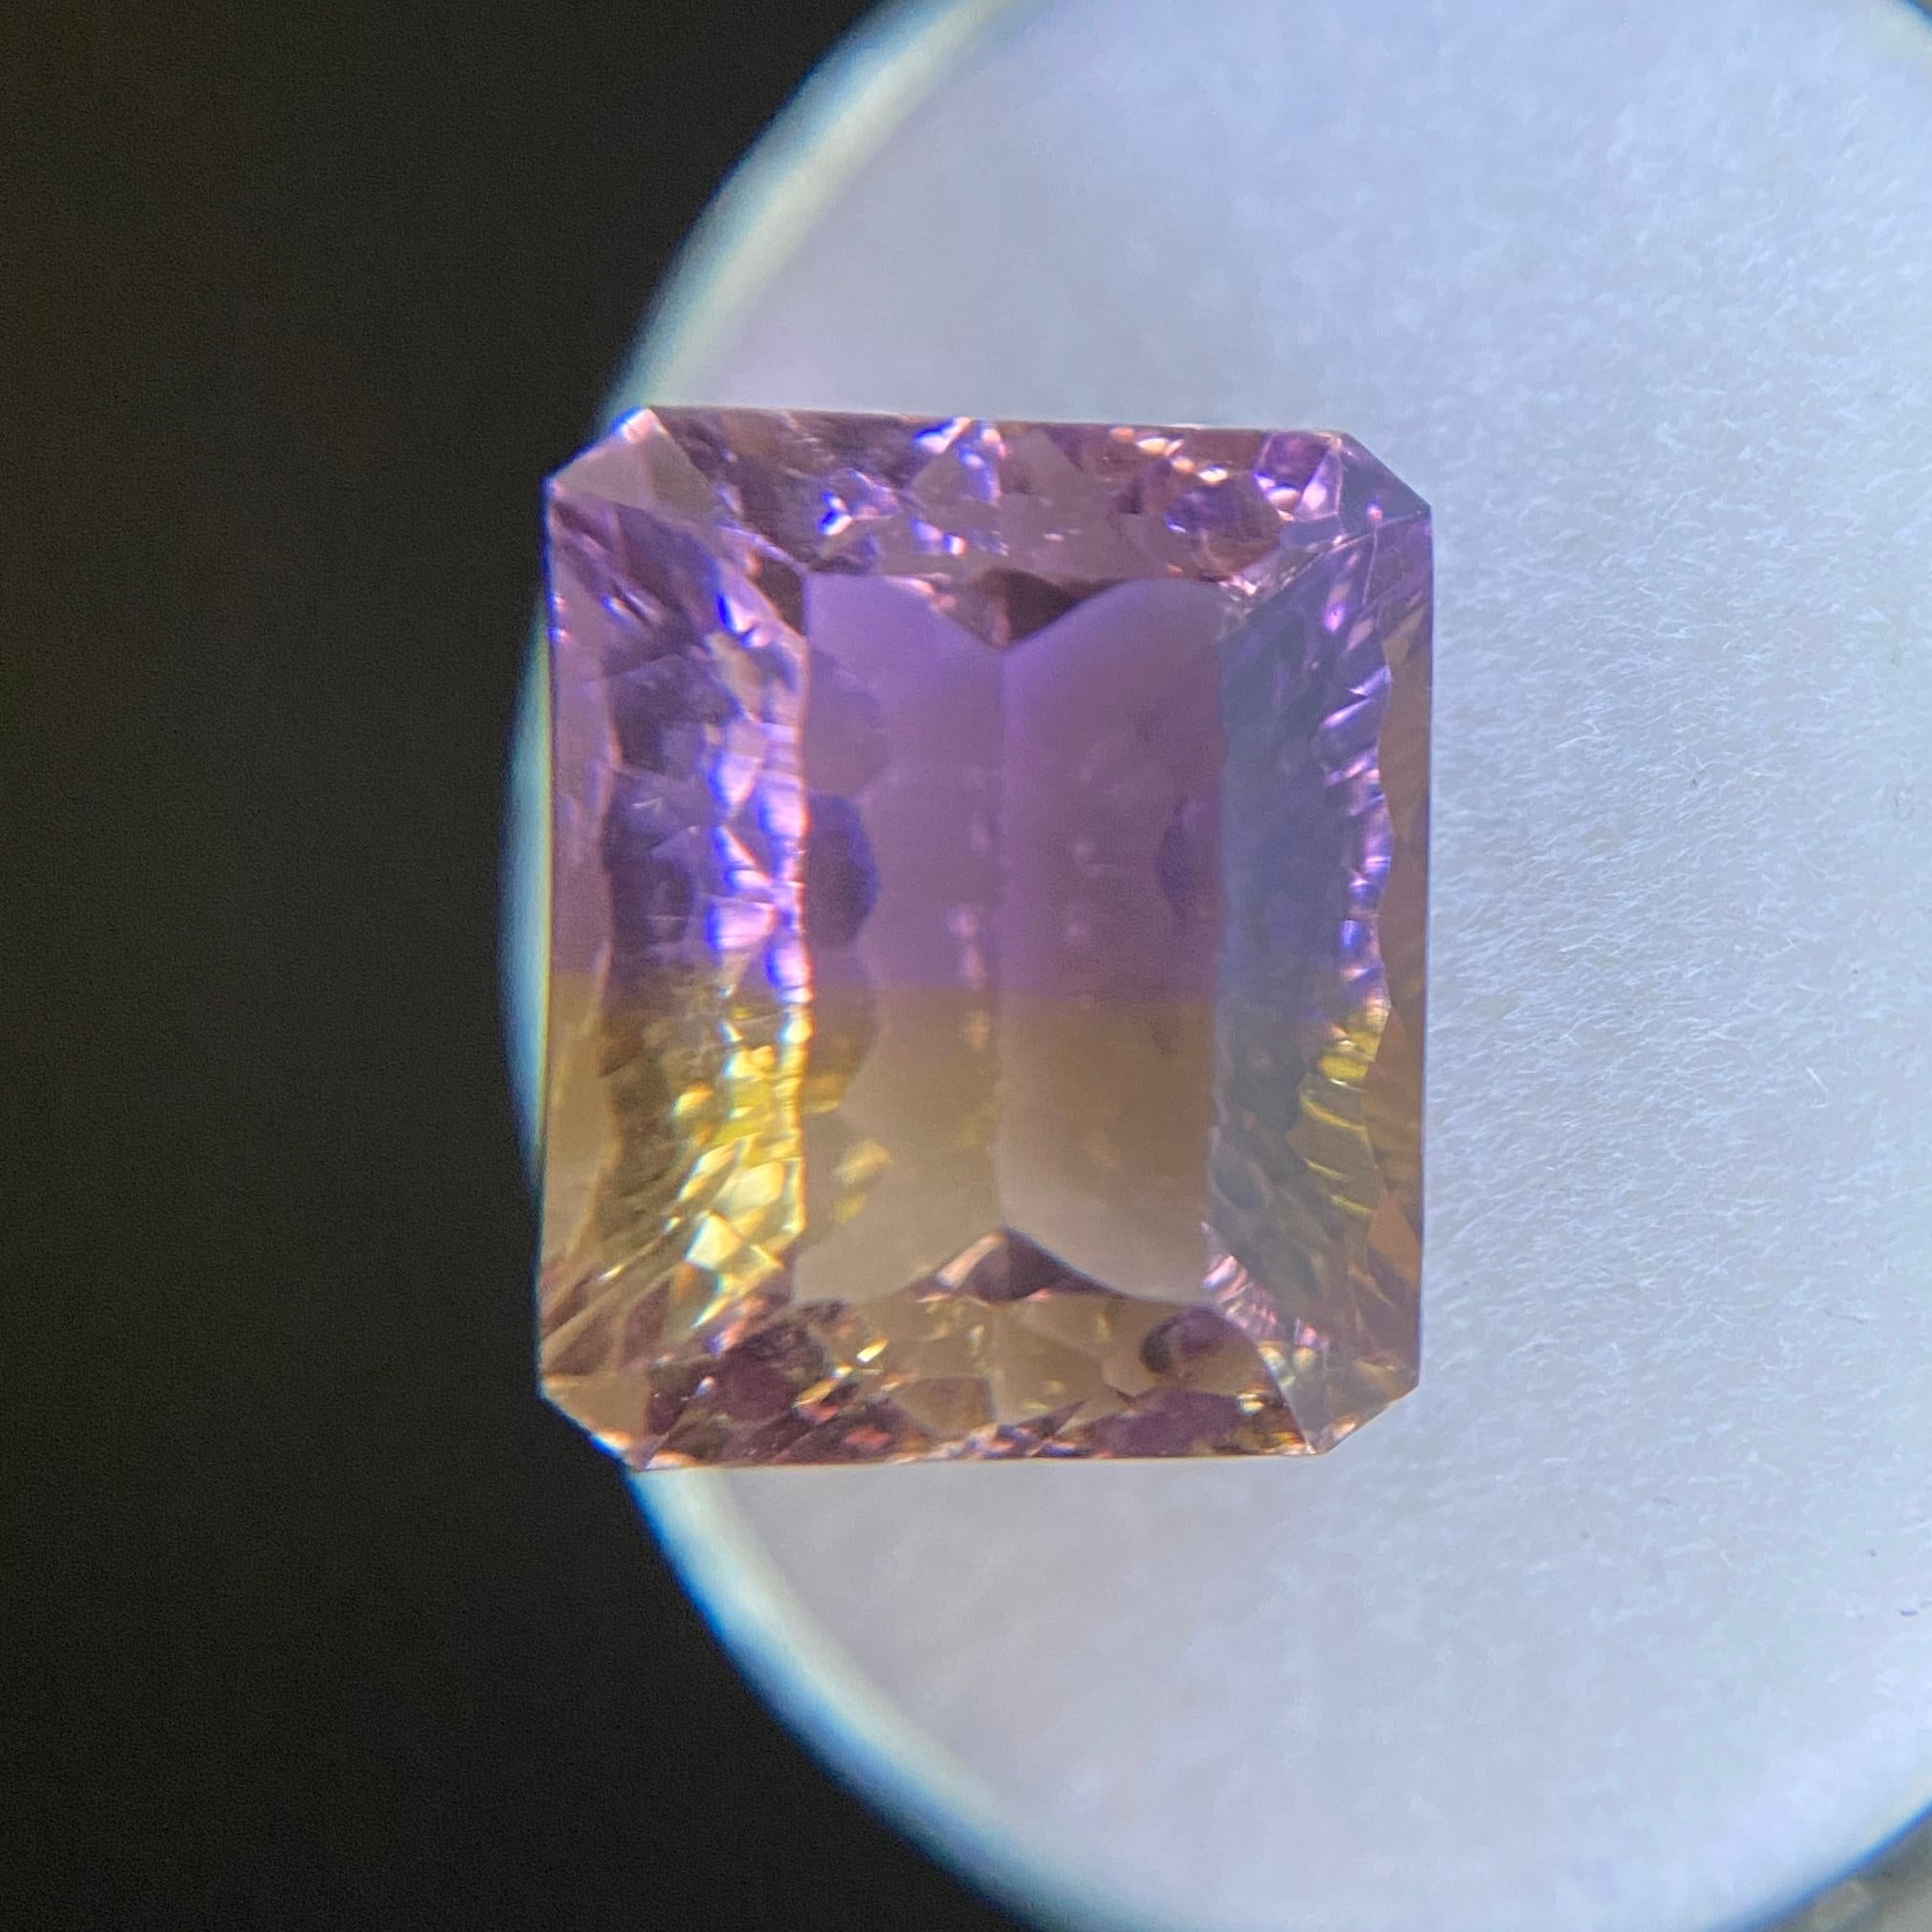 Fine Natural Ametrine Gemstone.

8.93 Carat natural Ametrine with an excellent fancy emerald octagon cut and beautiful colour split of yellow and purple.

Also has excellent clarity with only some small very natural inclusions visible when looking